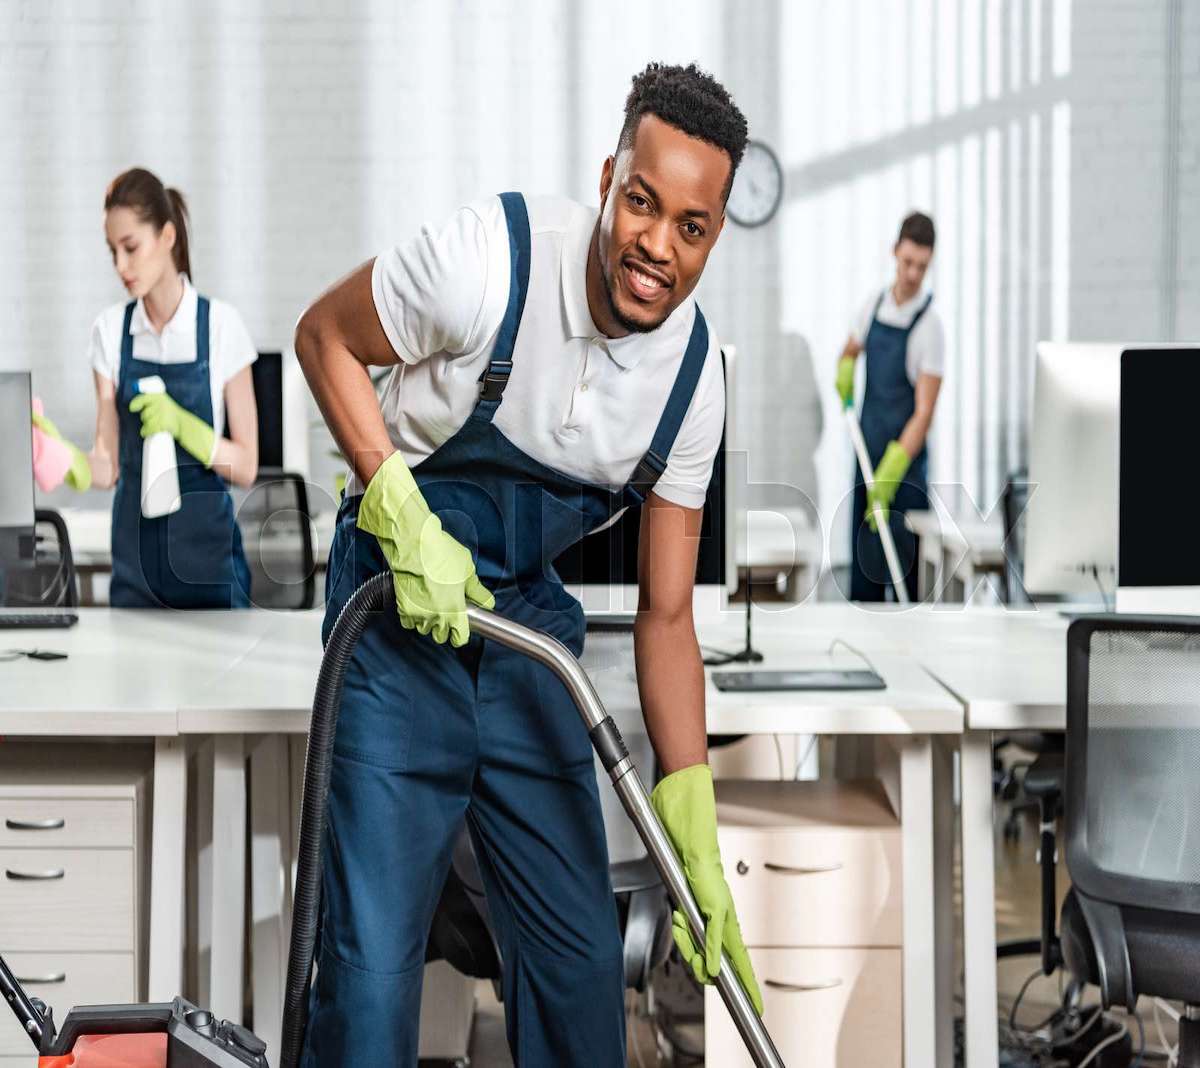 Latest Cleaning Jobs in Canada With Visa Sponsorship